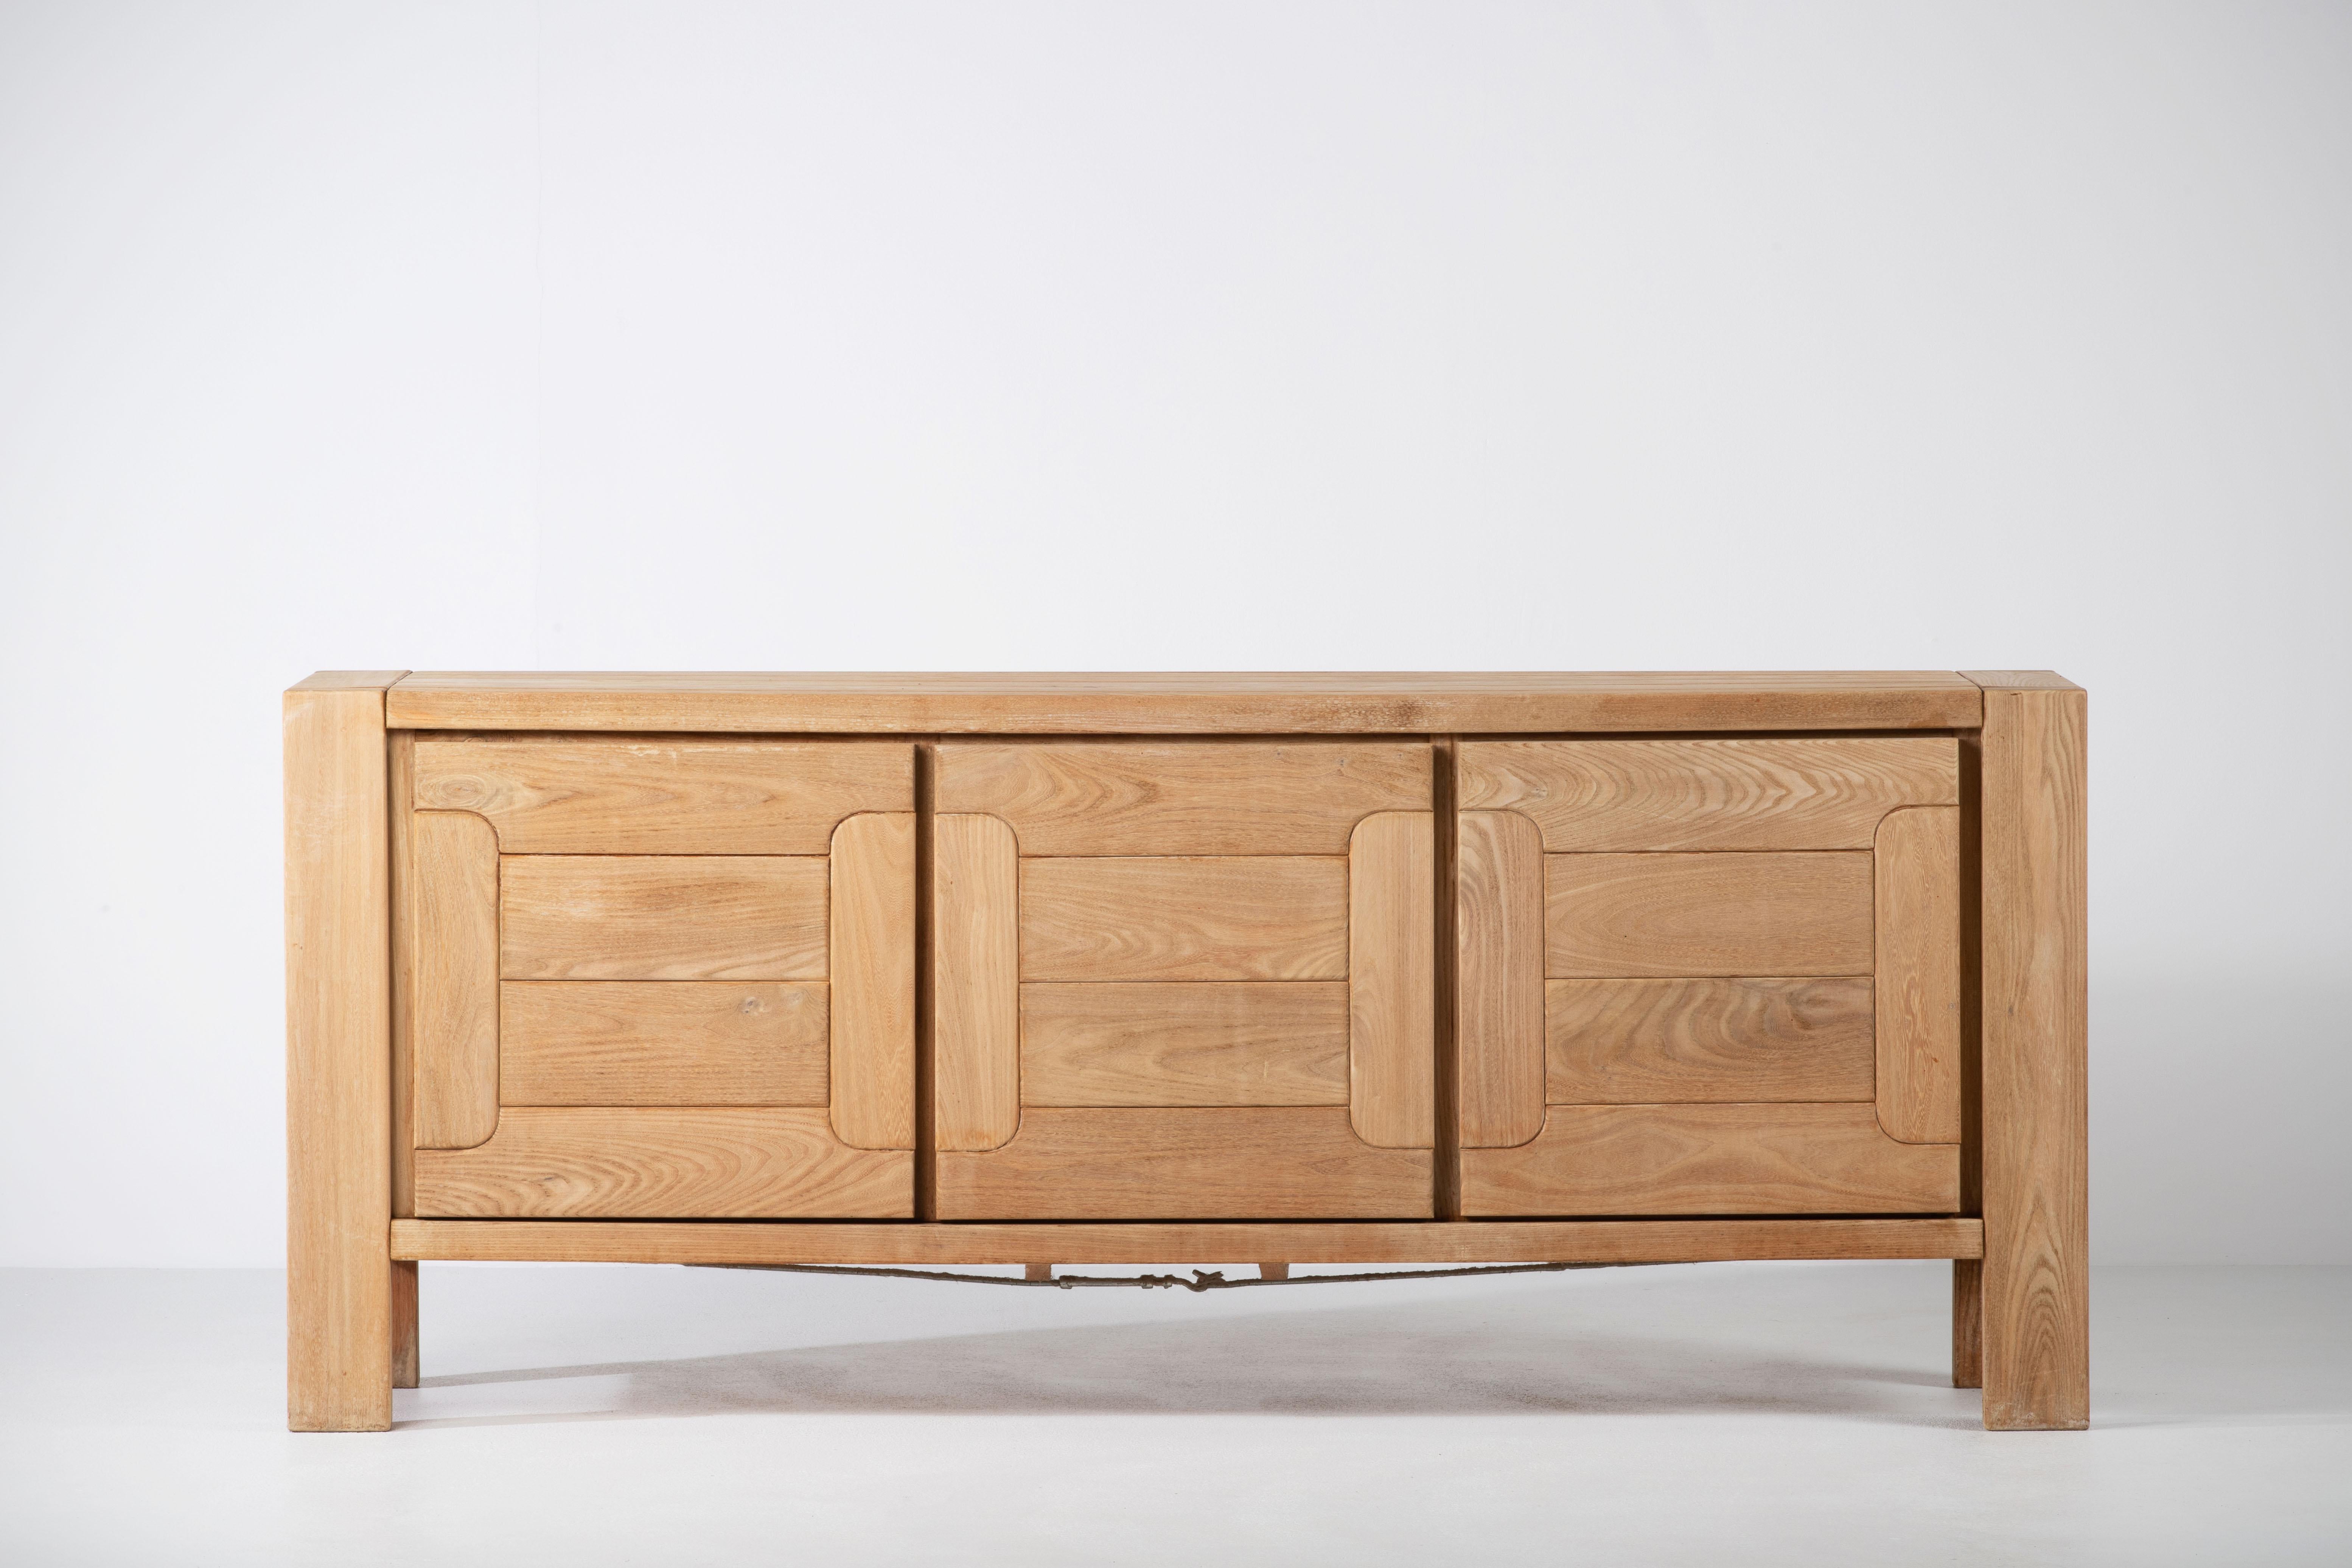 This impressive sideboard is attributed at Maison Regain, France in the late 1970s. The sideboard is made in solid elmwood and has a double door on the left with two beautifully crafted, sculptural handles. 
The wooden connections on the top, the